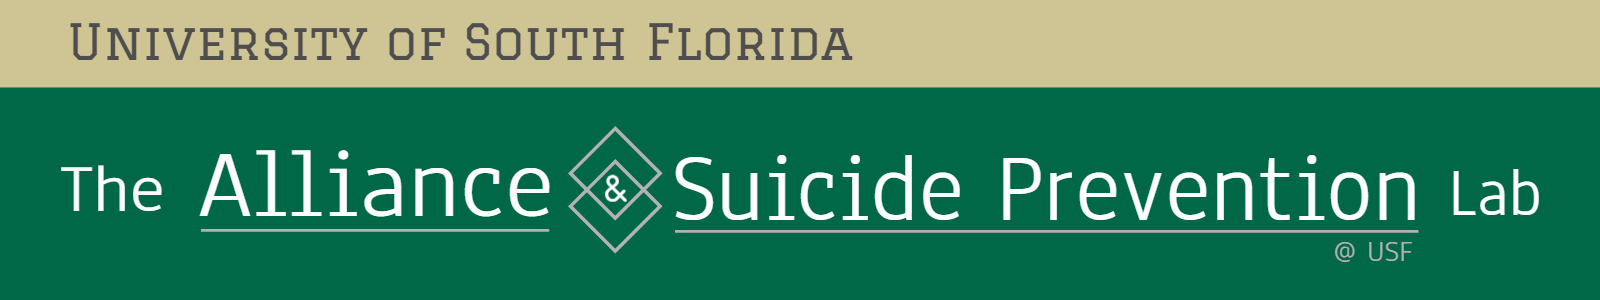 Alliance and Suicide Prevention Lab